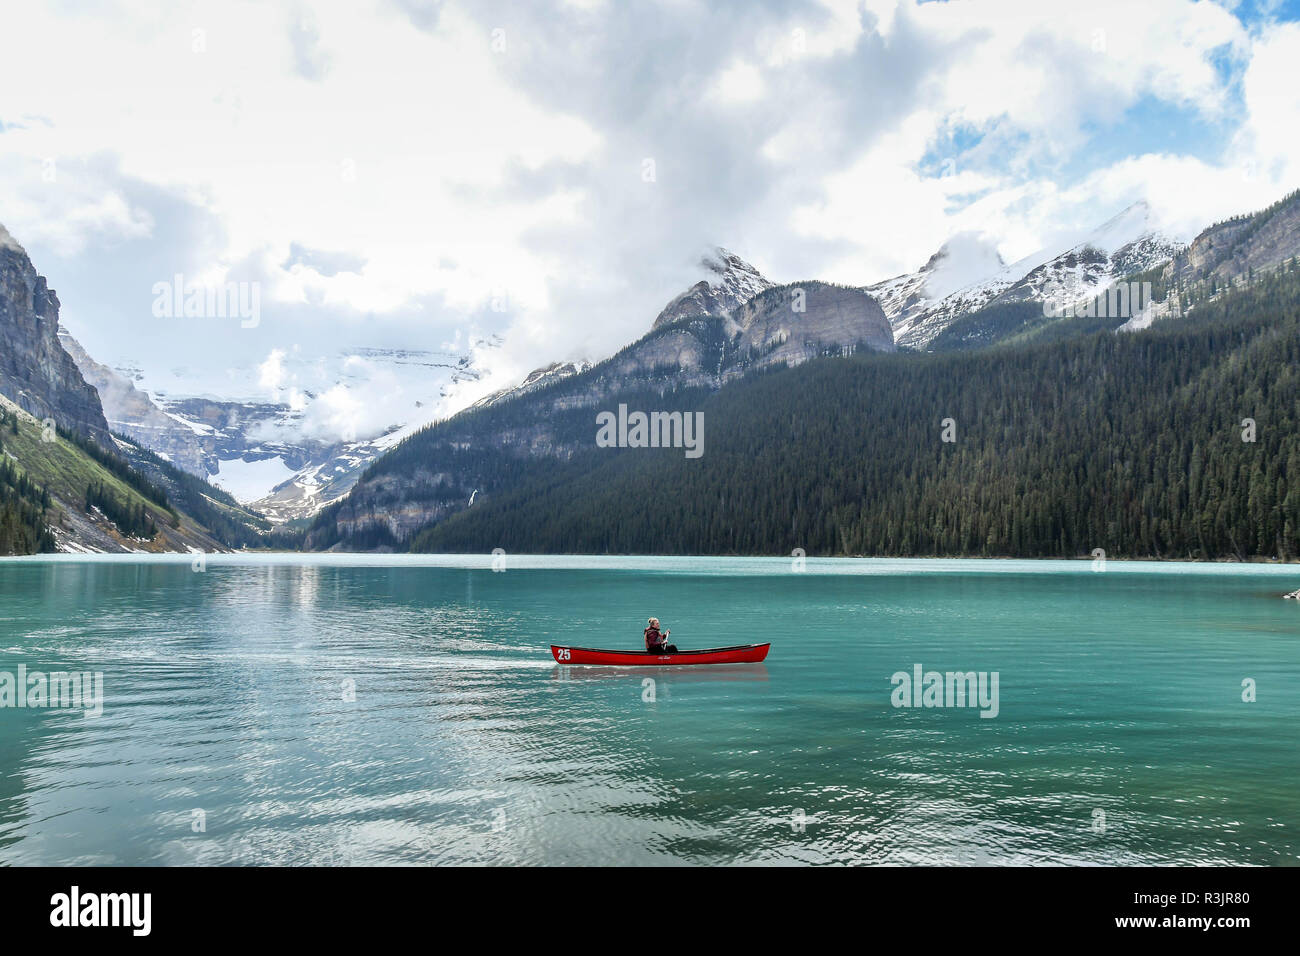 LAKE LOUISE, AB, CANADA - JUNE 2018: Person paddling a canoe on Lake Louise in Alberta, Canada. Stock Photo